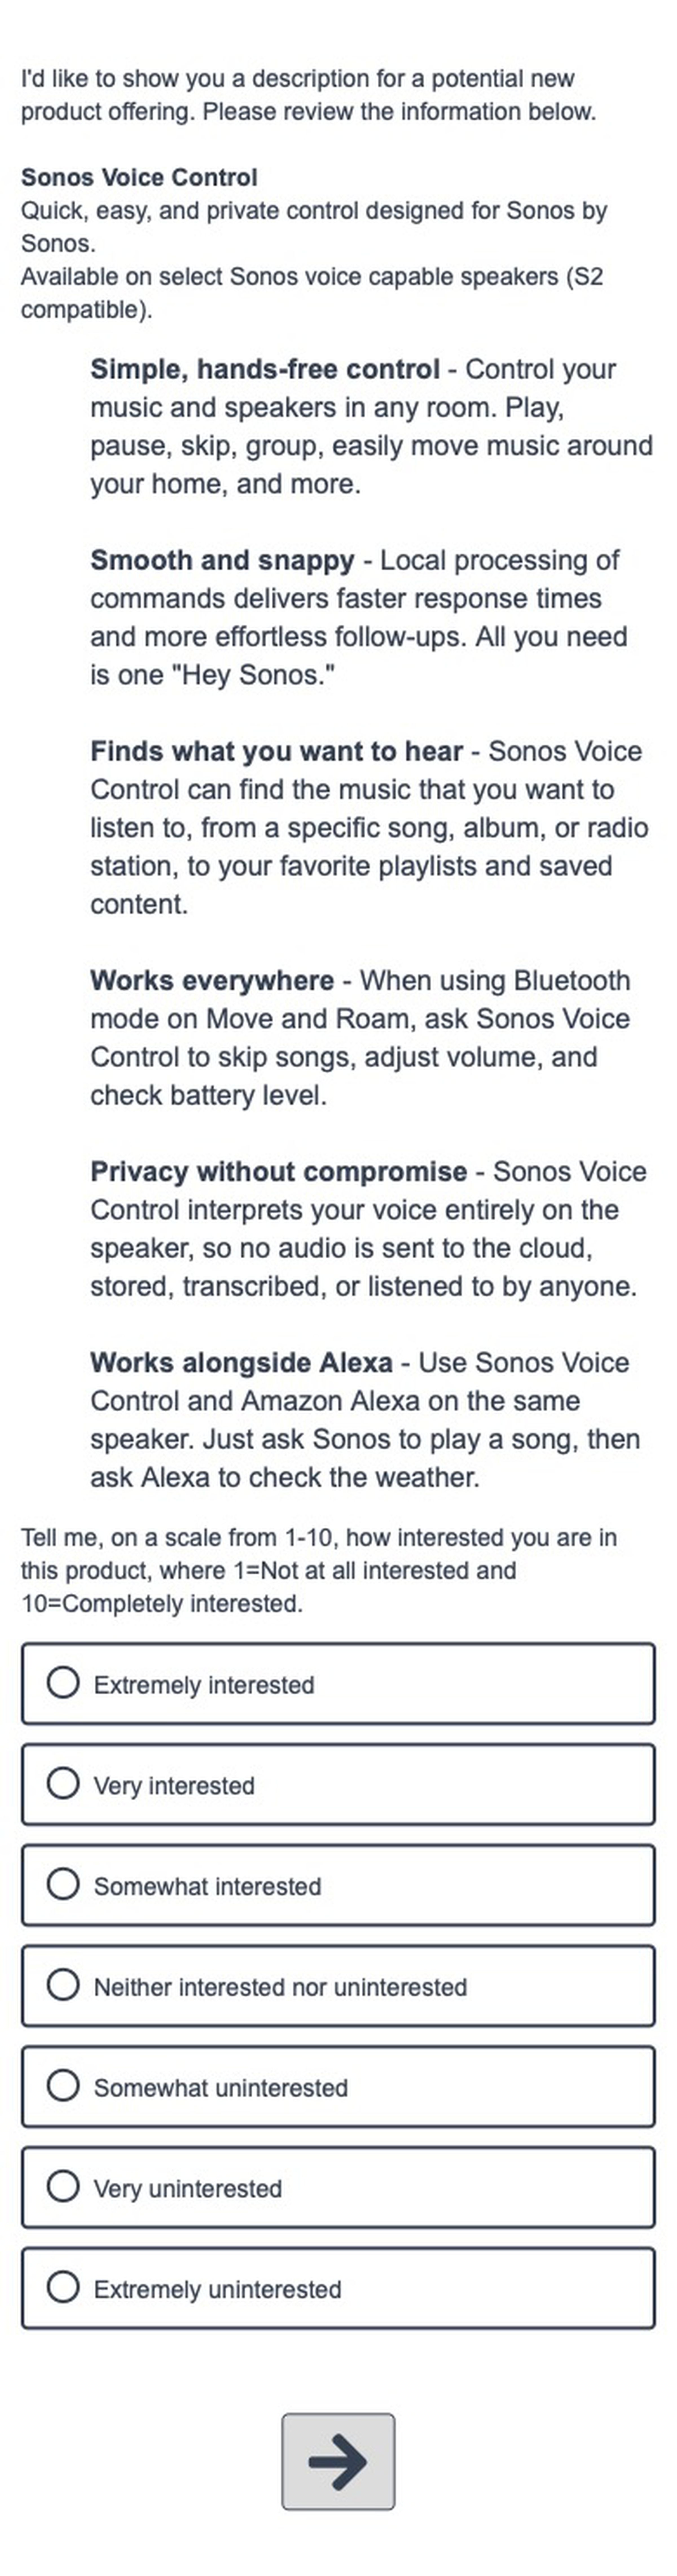 Sonos’ survey asking for customer input on a new voice control system.